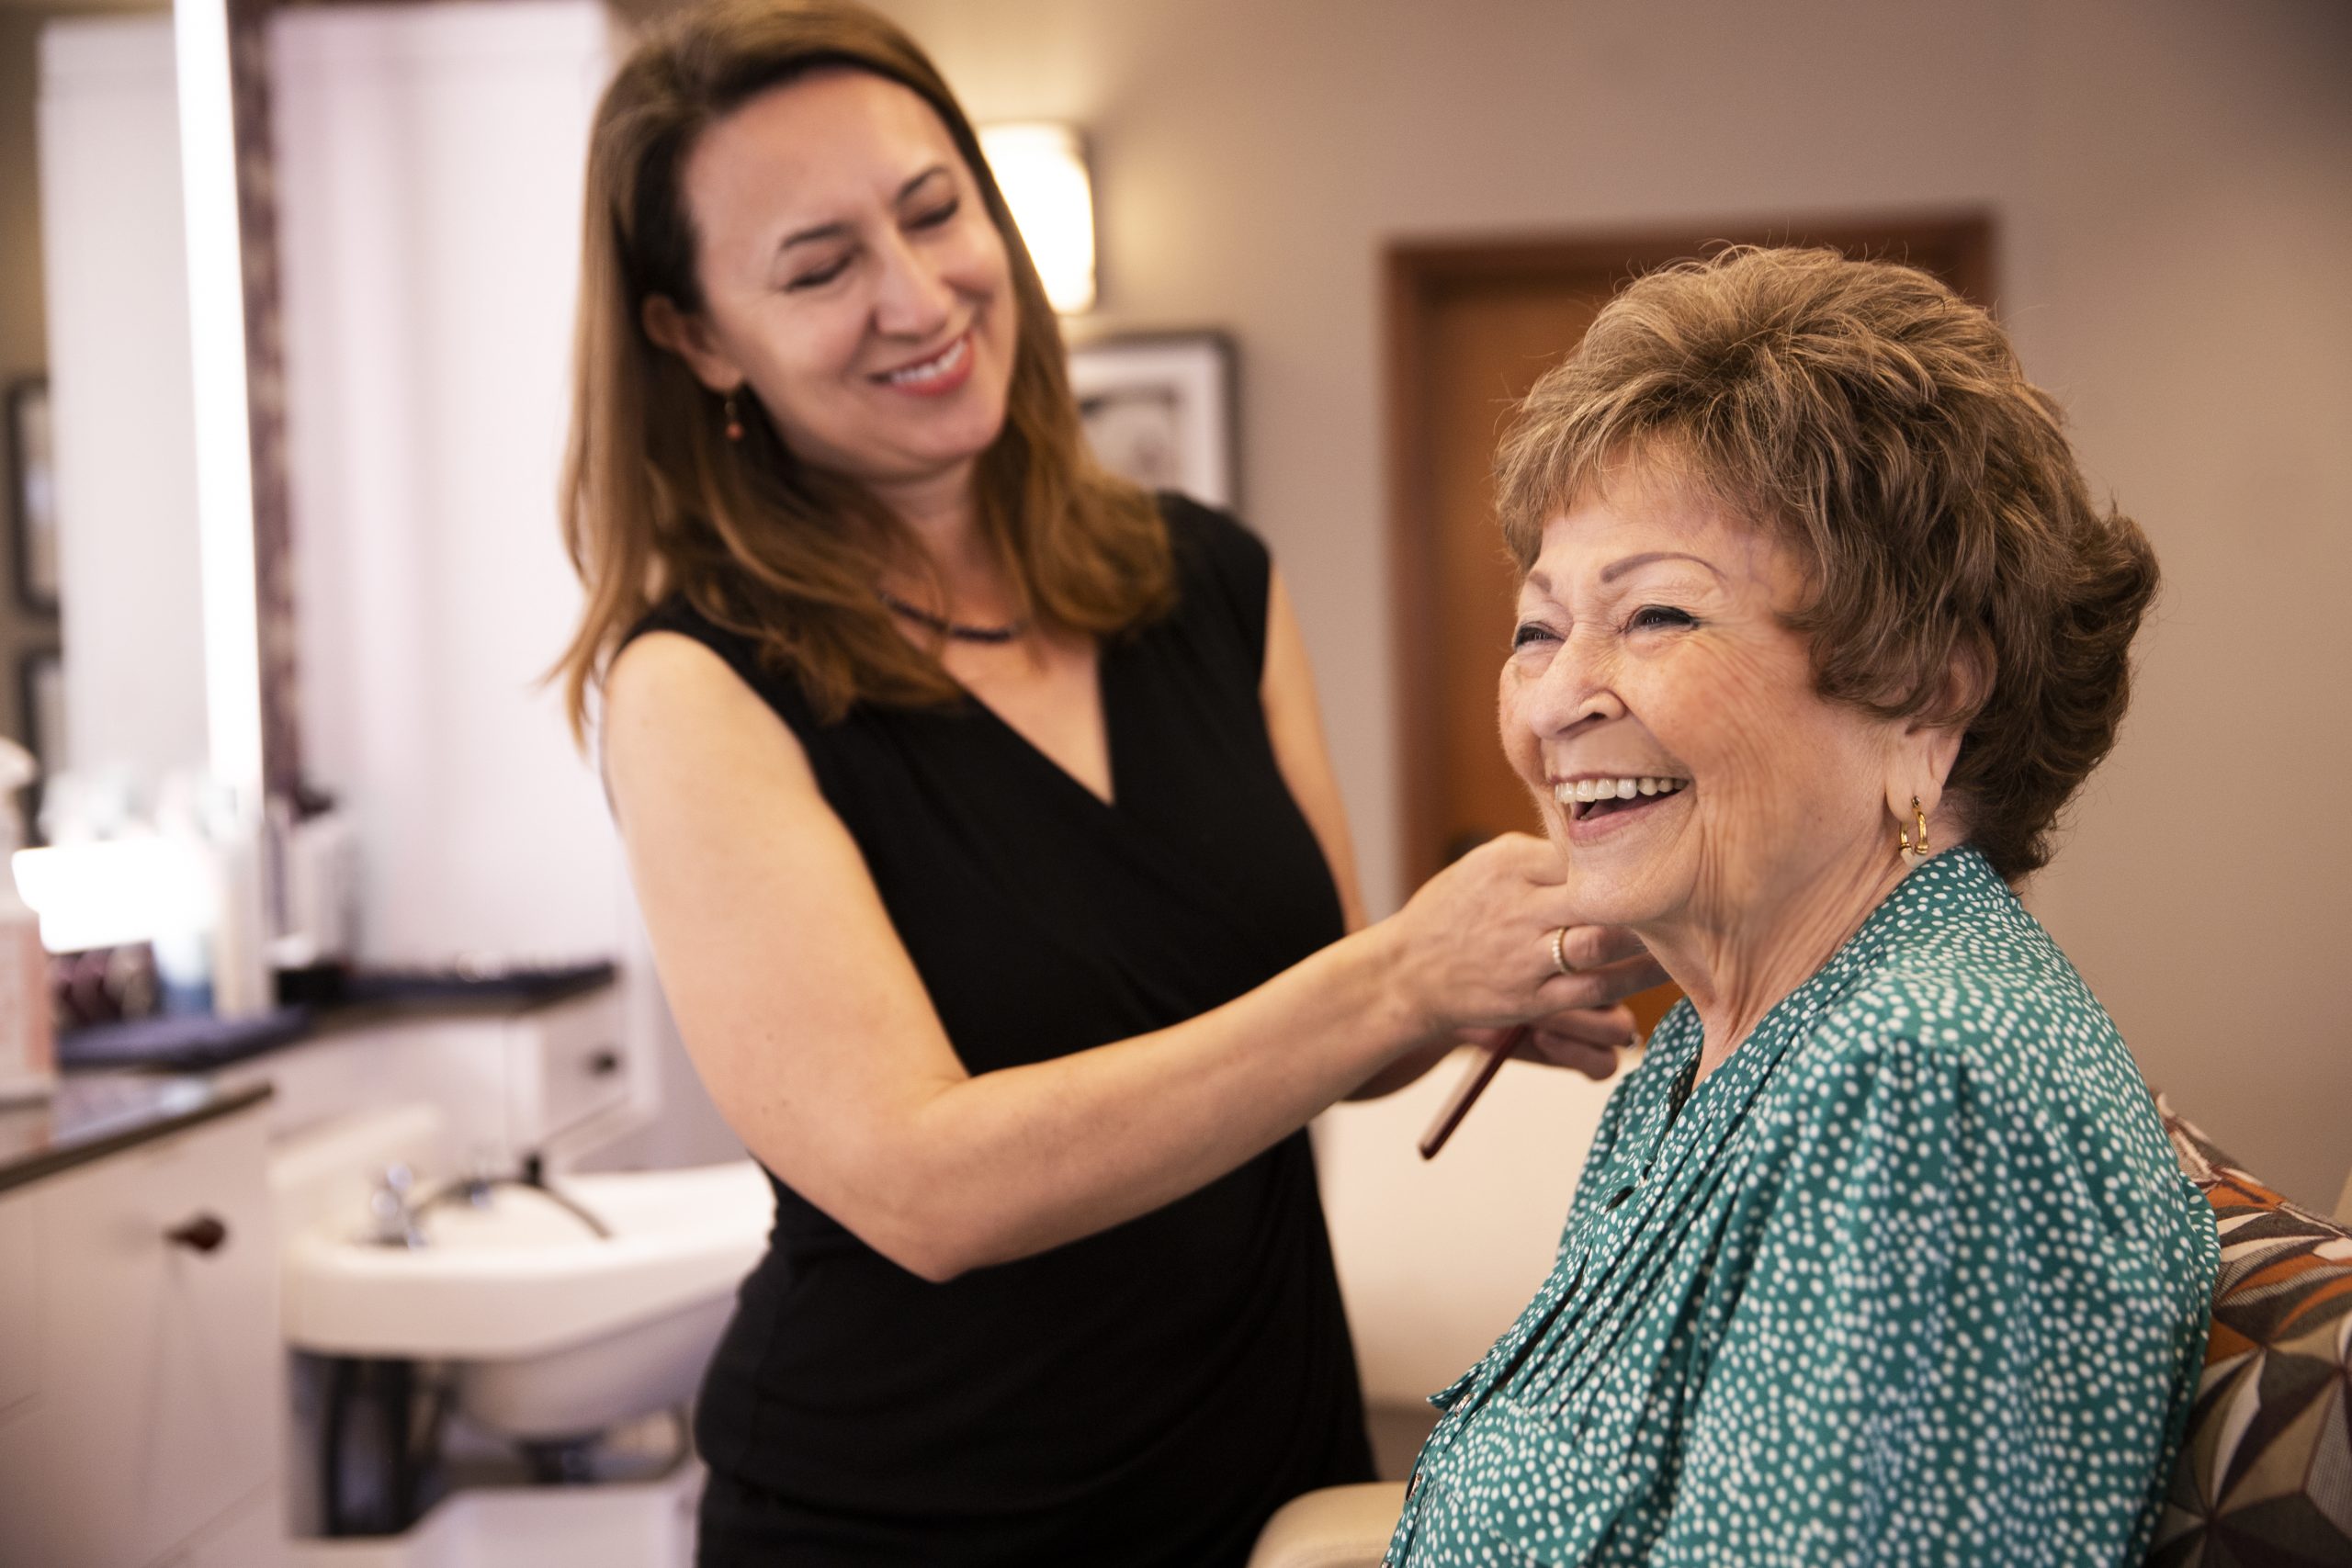 elderly woman getting her hair done in a salon by a stylist